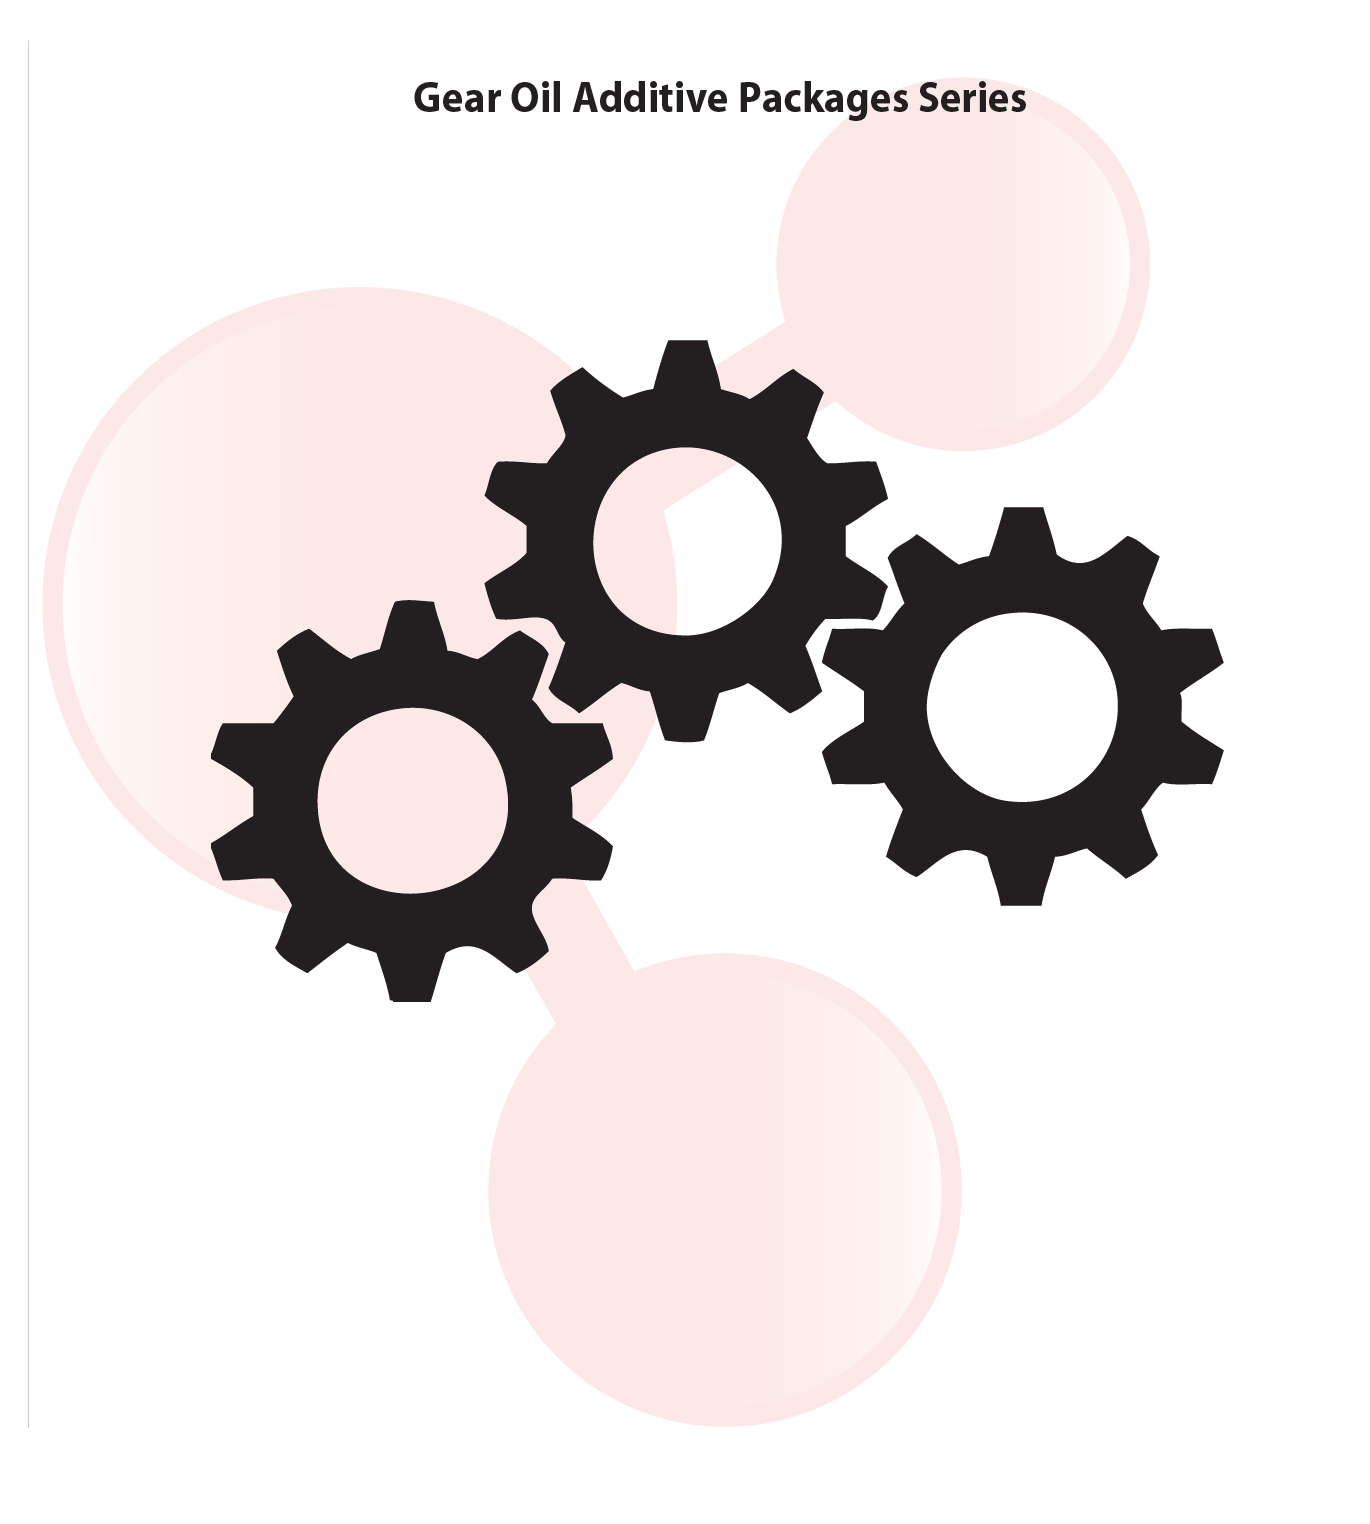 Gear Oil Additive Packages Series